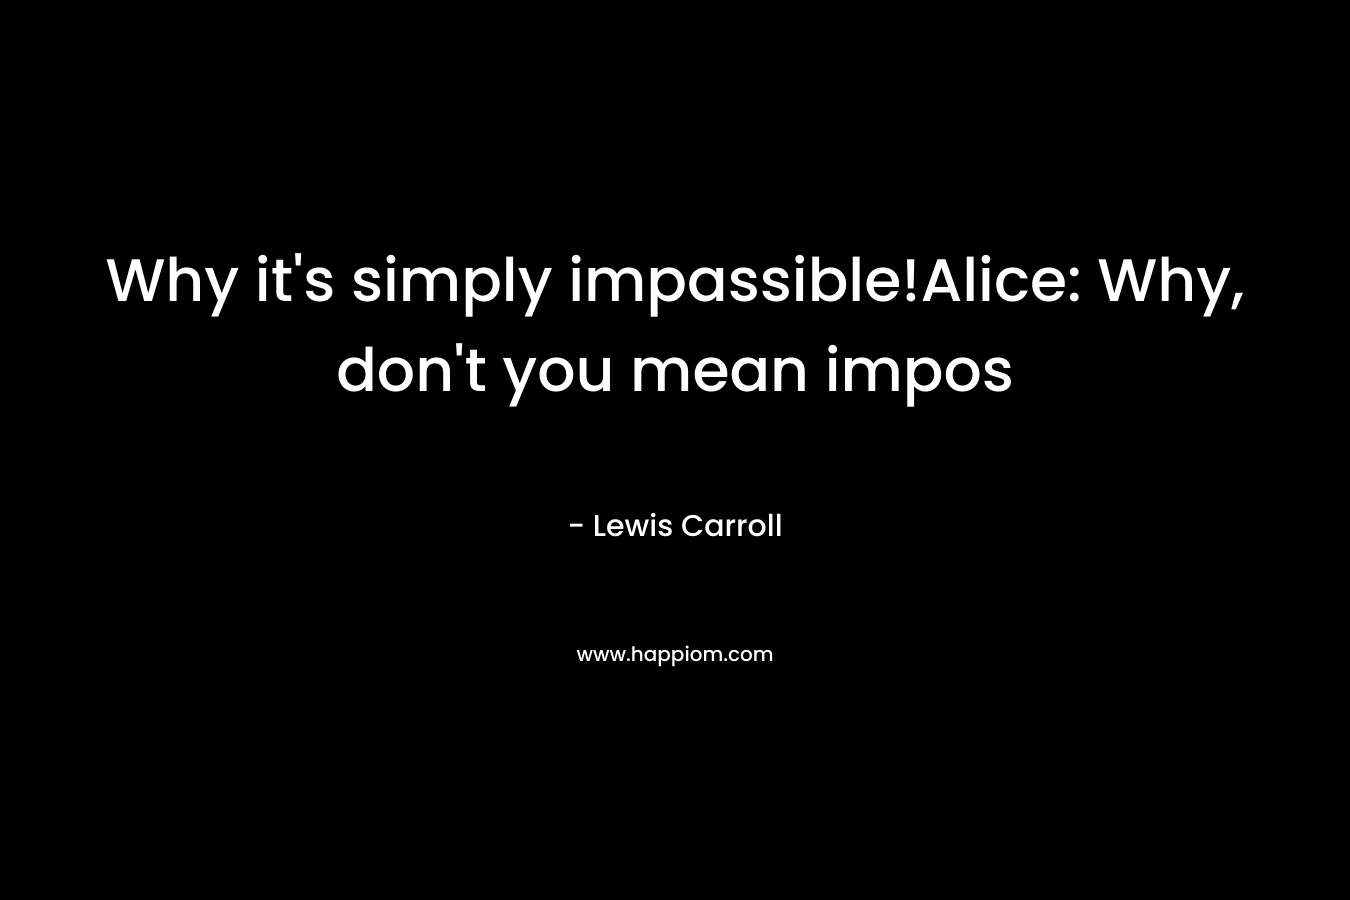 Why it's simply impassible!Alice: Why, don't you mean impos